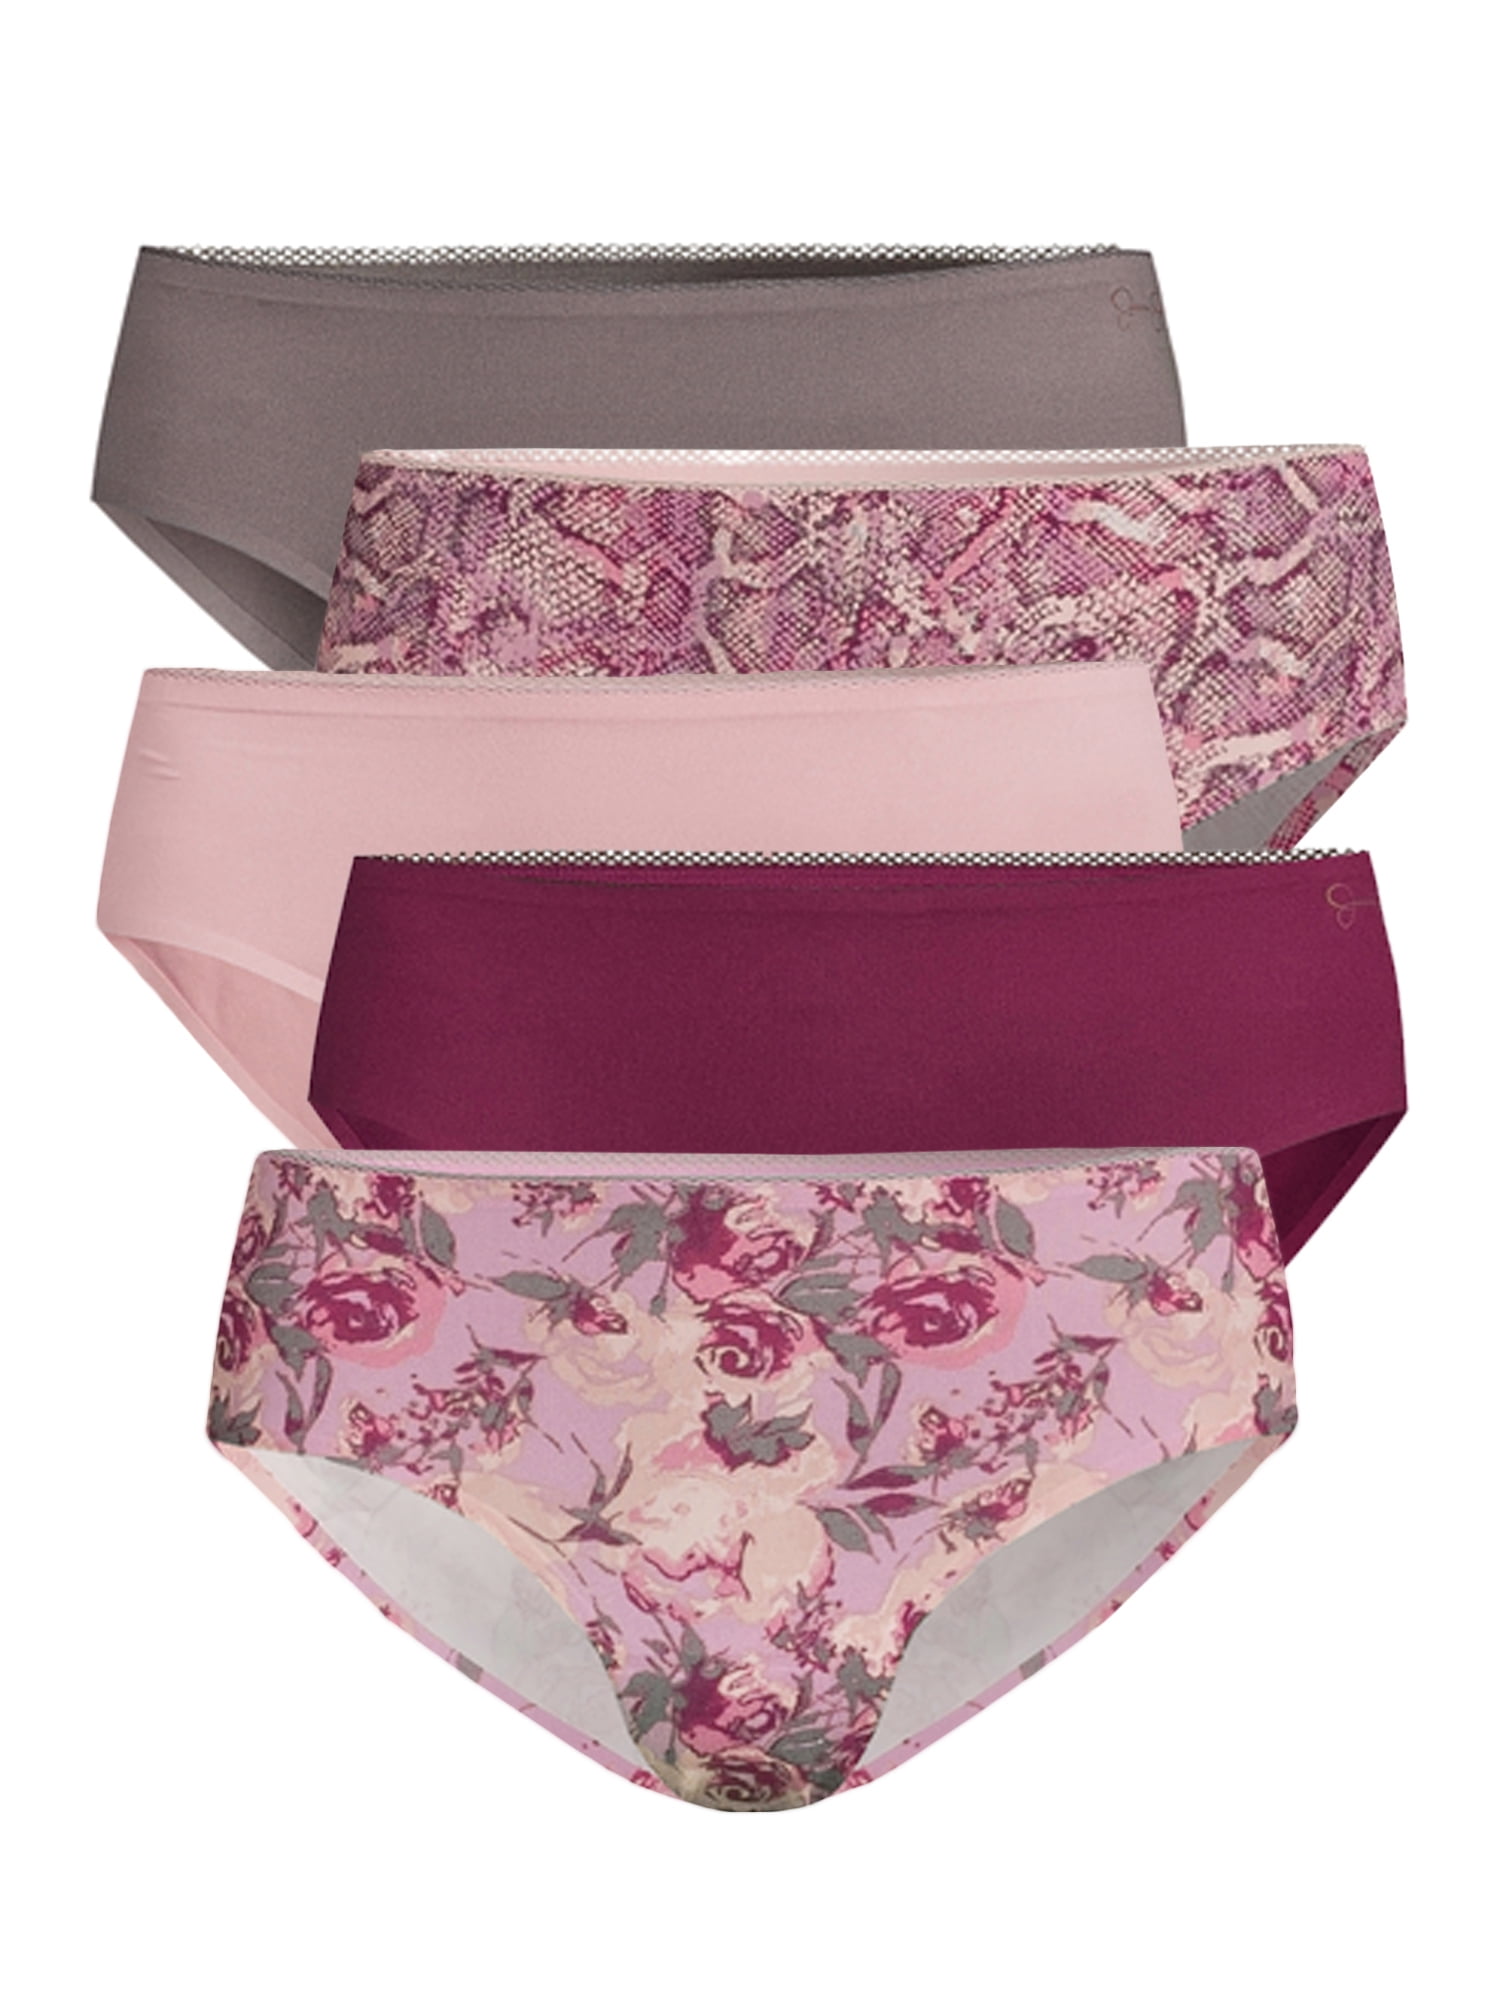 Jessica Simpson Women's Laser Bonded Hipster Panties, 5 Pack 